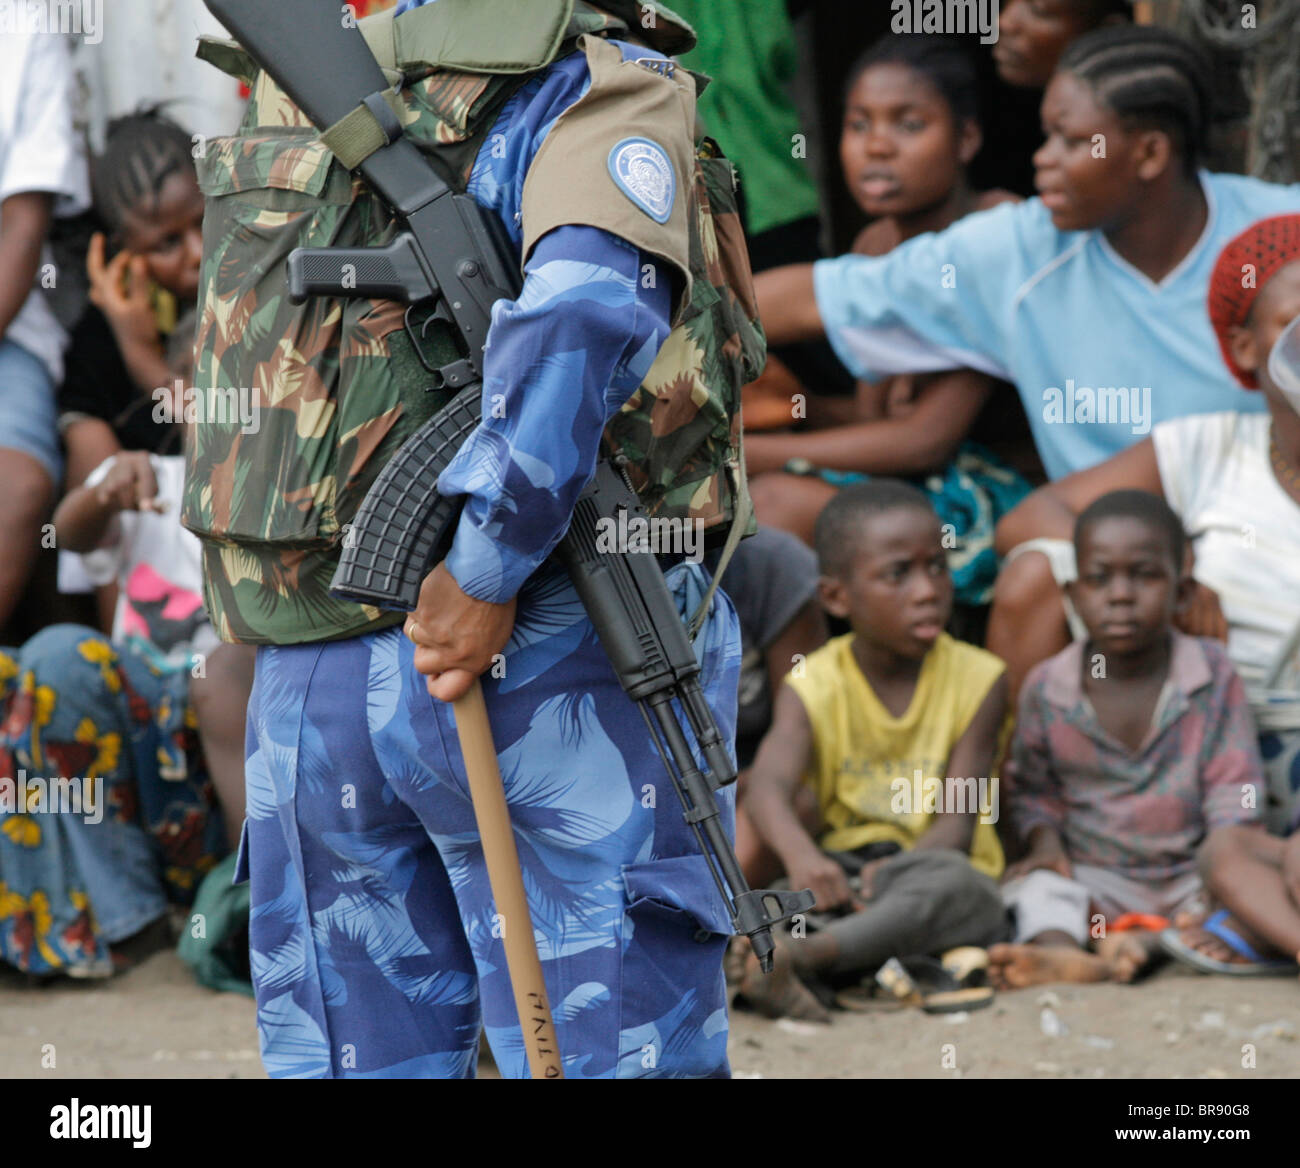 Peacekeeper with machine gun infront of group of kids Stock Photo